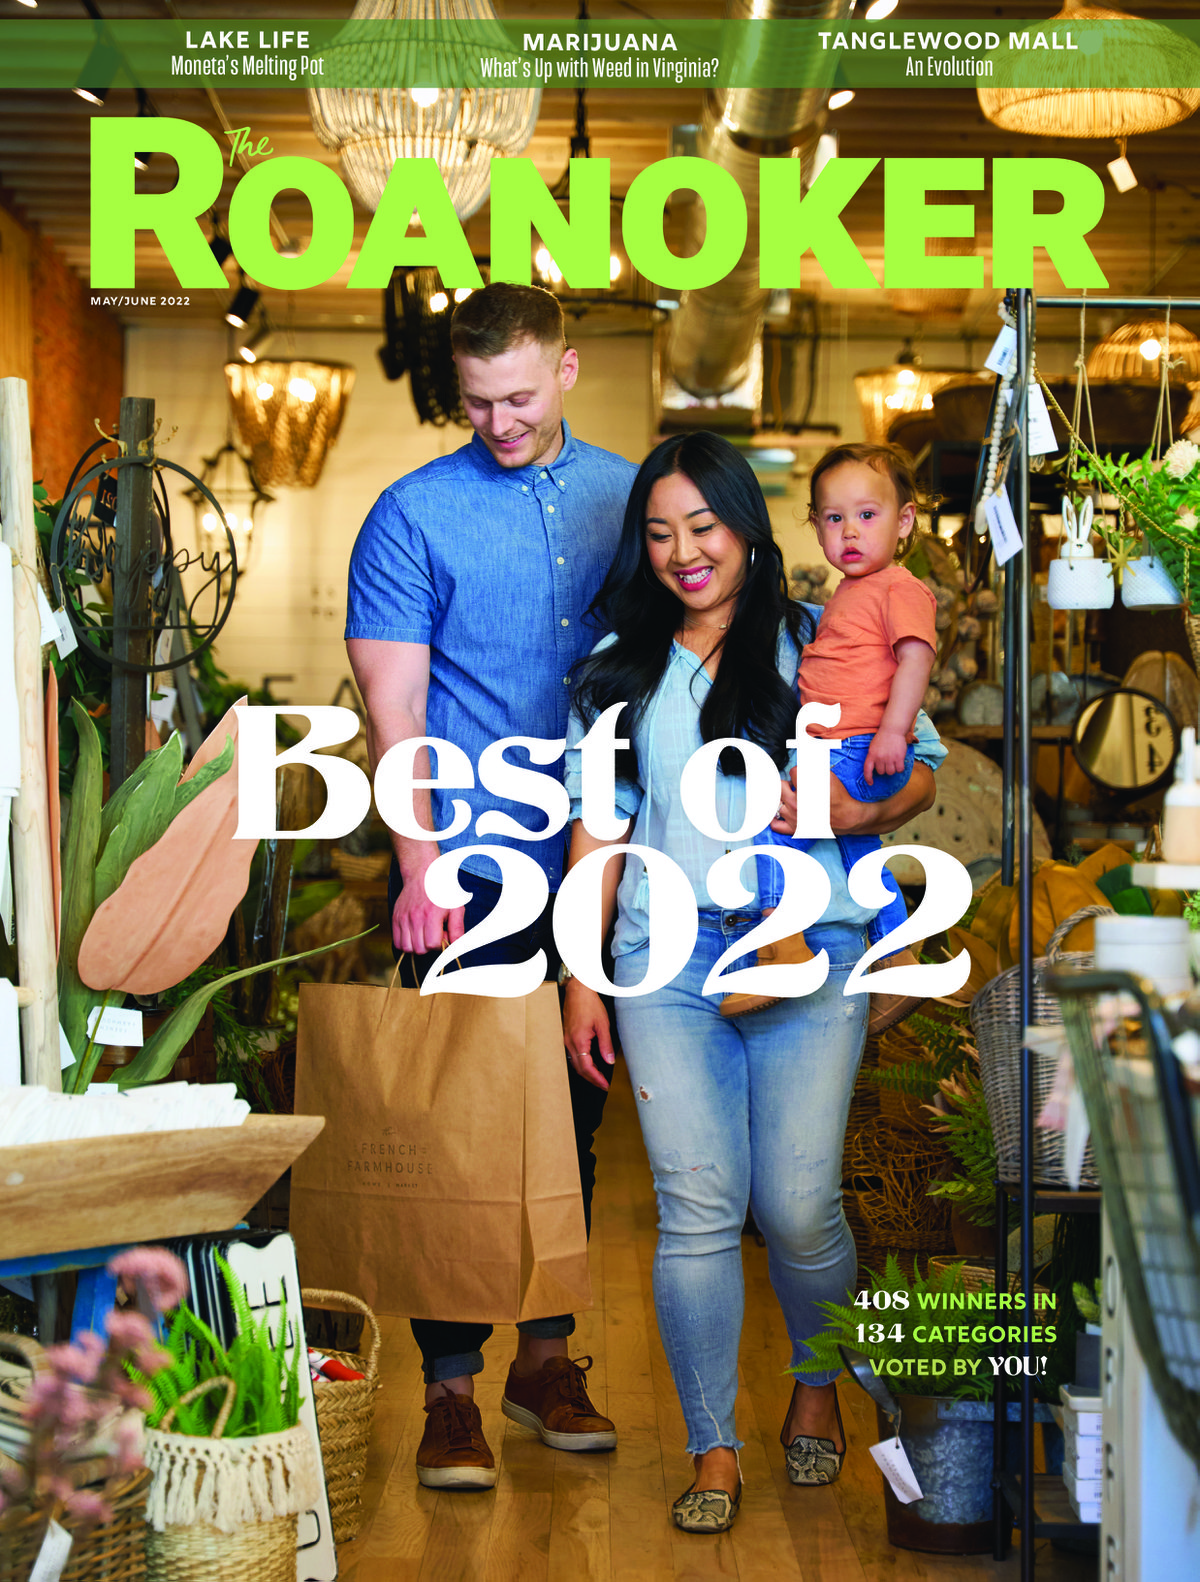 Andrew, Christine and Luka Troester enjoy a day of shopping inside award-winning The French Farmhouse in downtown Roanoke. Learn more about The French Farmhouse and see their Best of Roanoke reader poll wins in our May/June '22 issue.